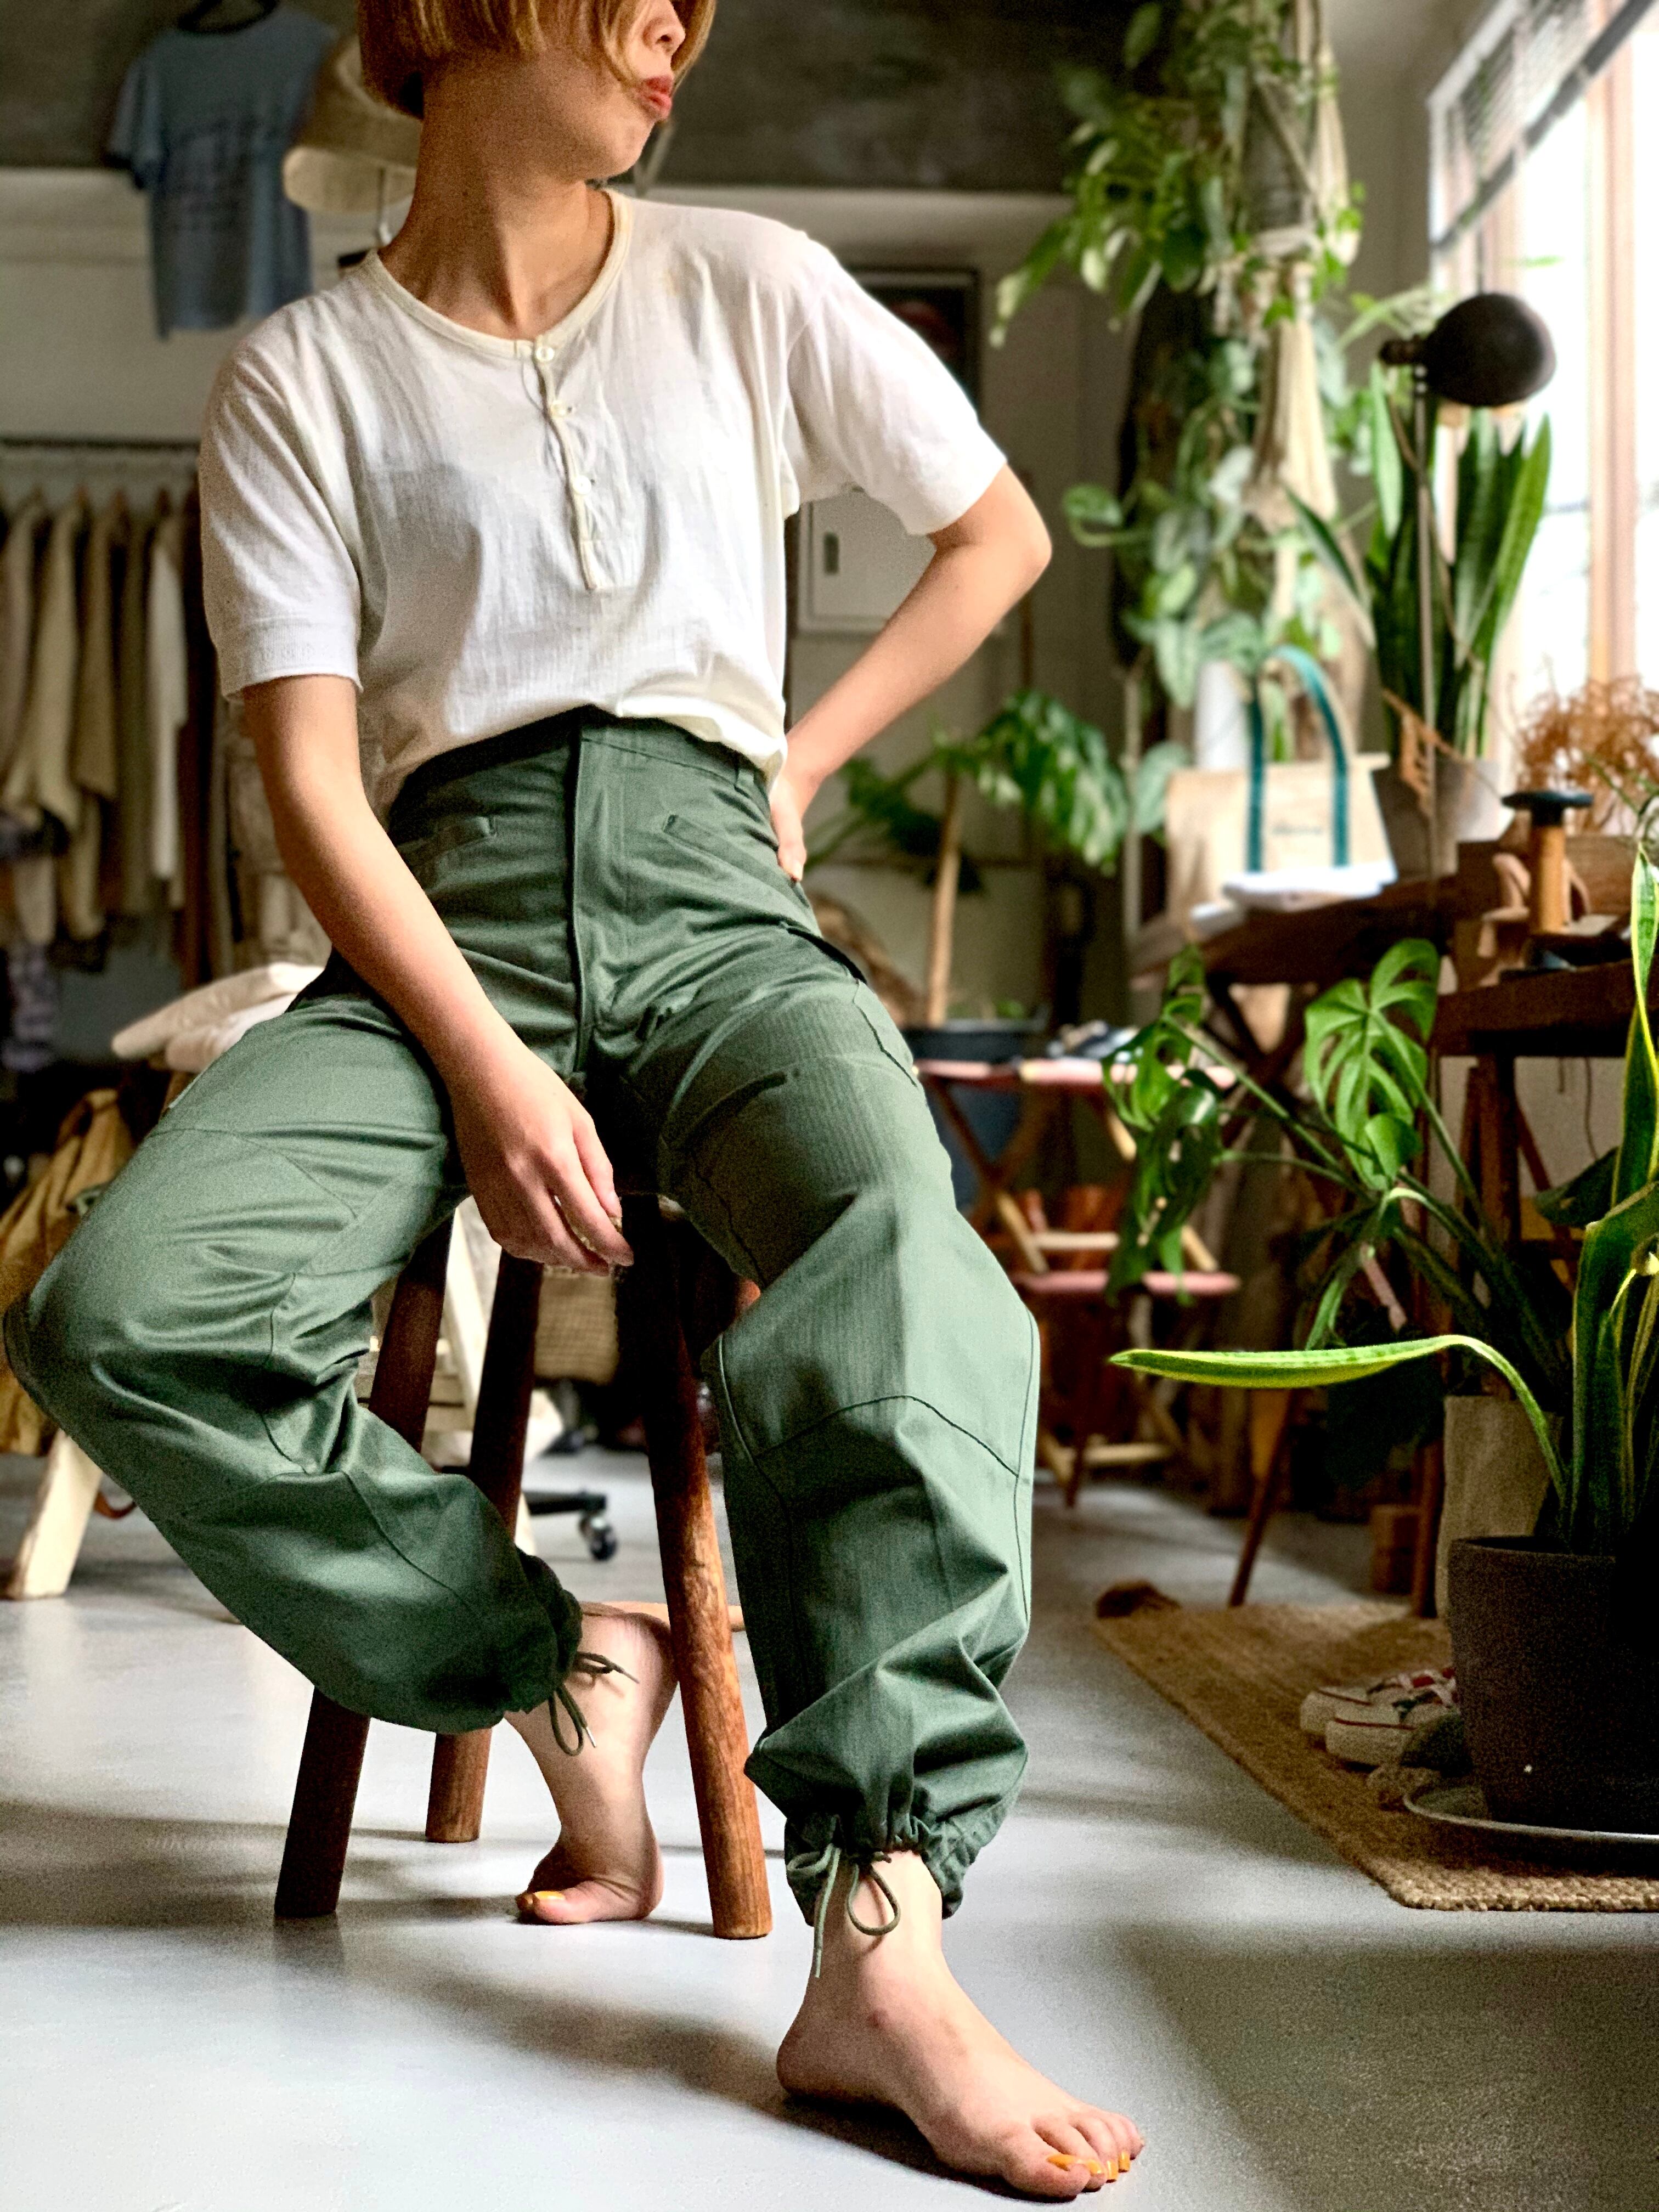 CURLY Aviator AC Trousers